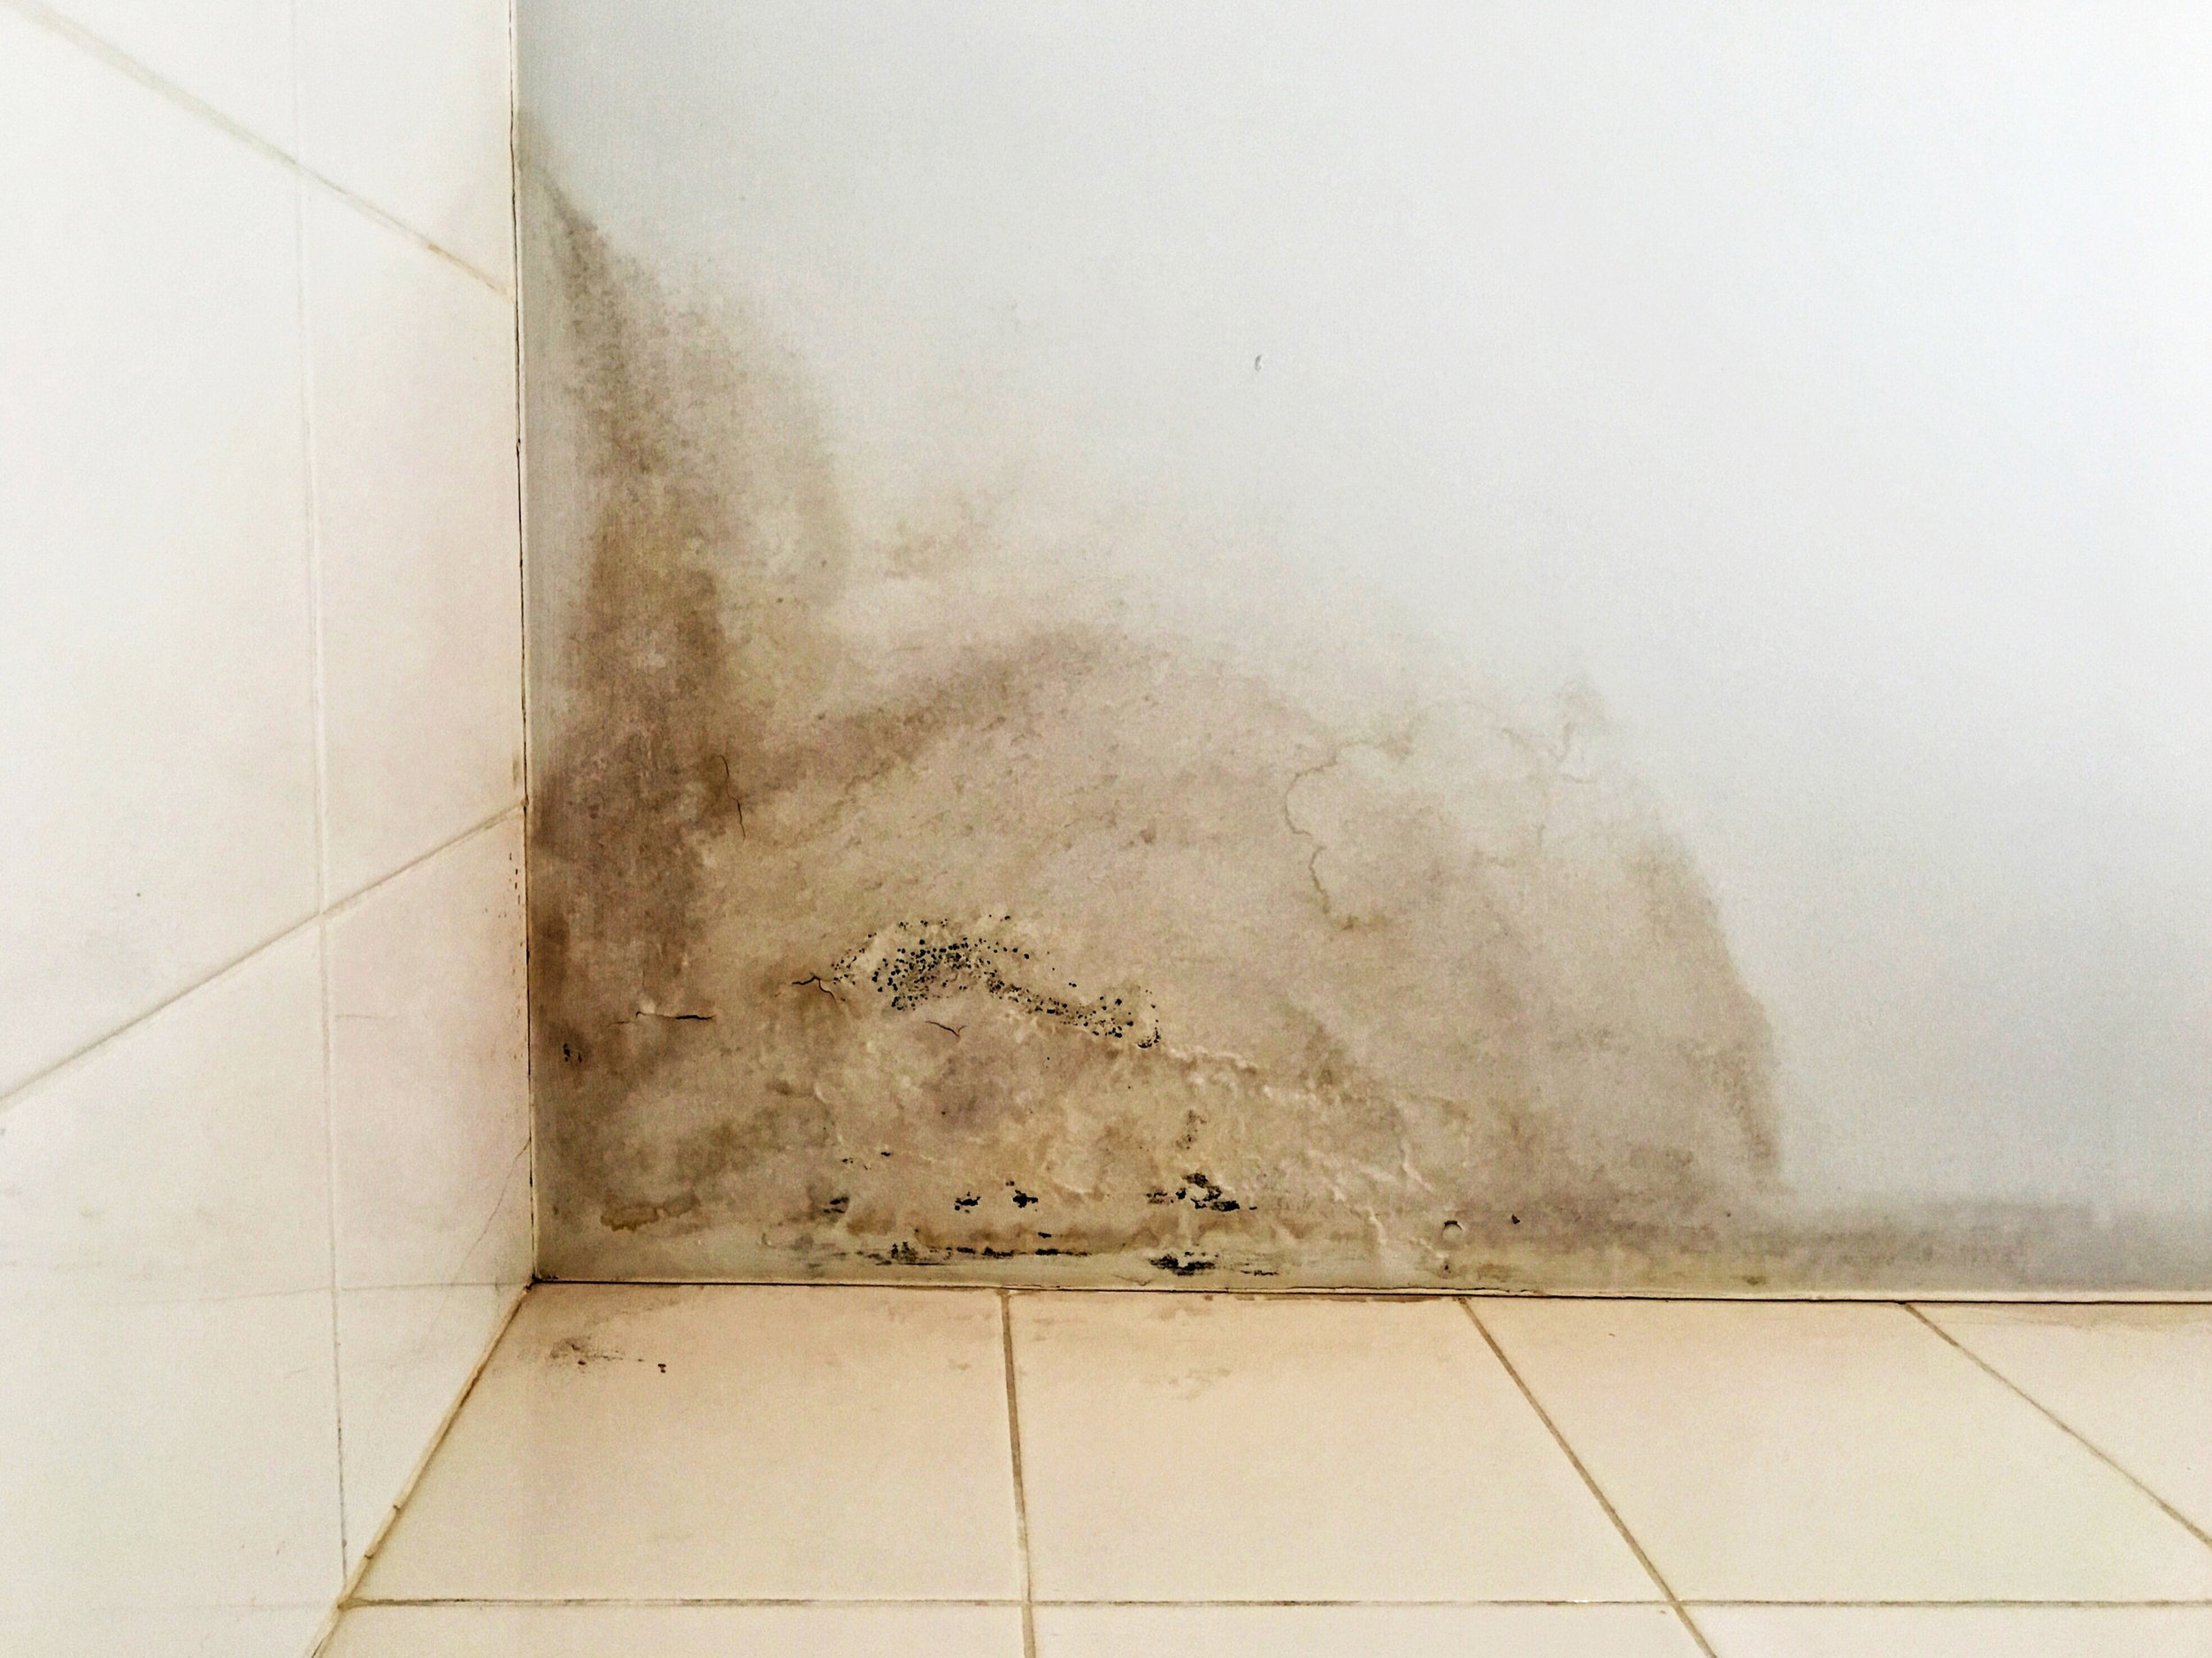 Toxic mold can grow indoors in places where water damage has occurred. The presence of stagnant water, humidity, and an enclosed space creates the perfect environment for mold growth.